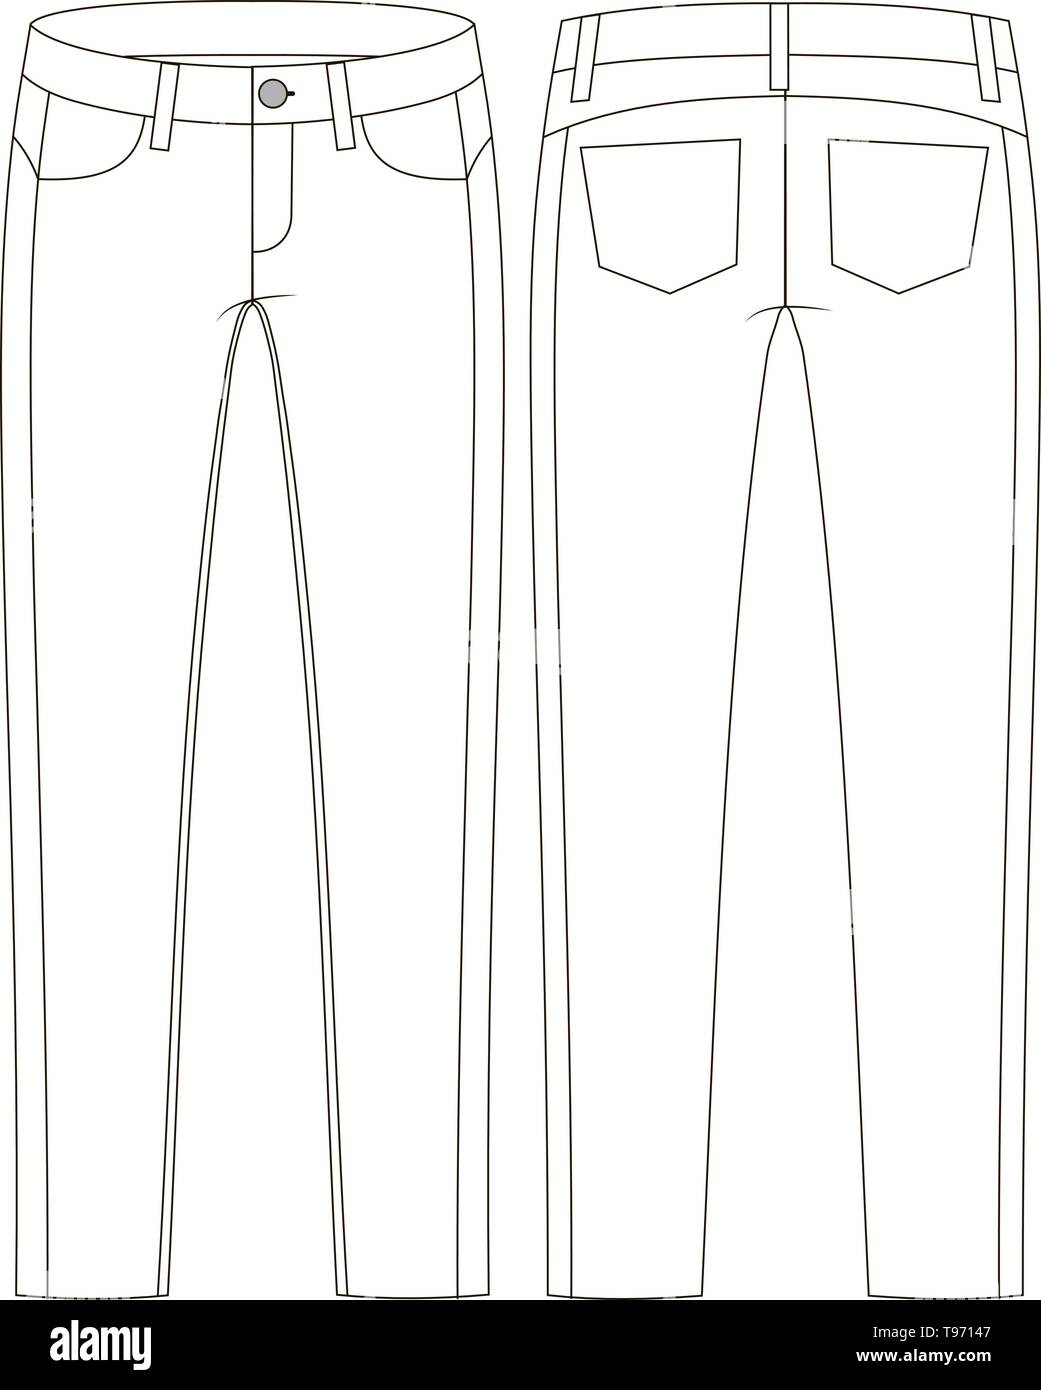 Fashion technical sketch of jeans in vector graphic Stock Vector Image ...